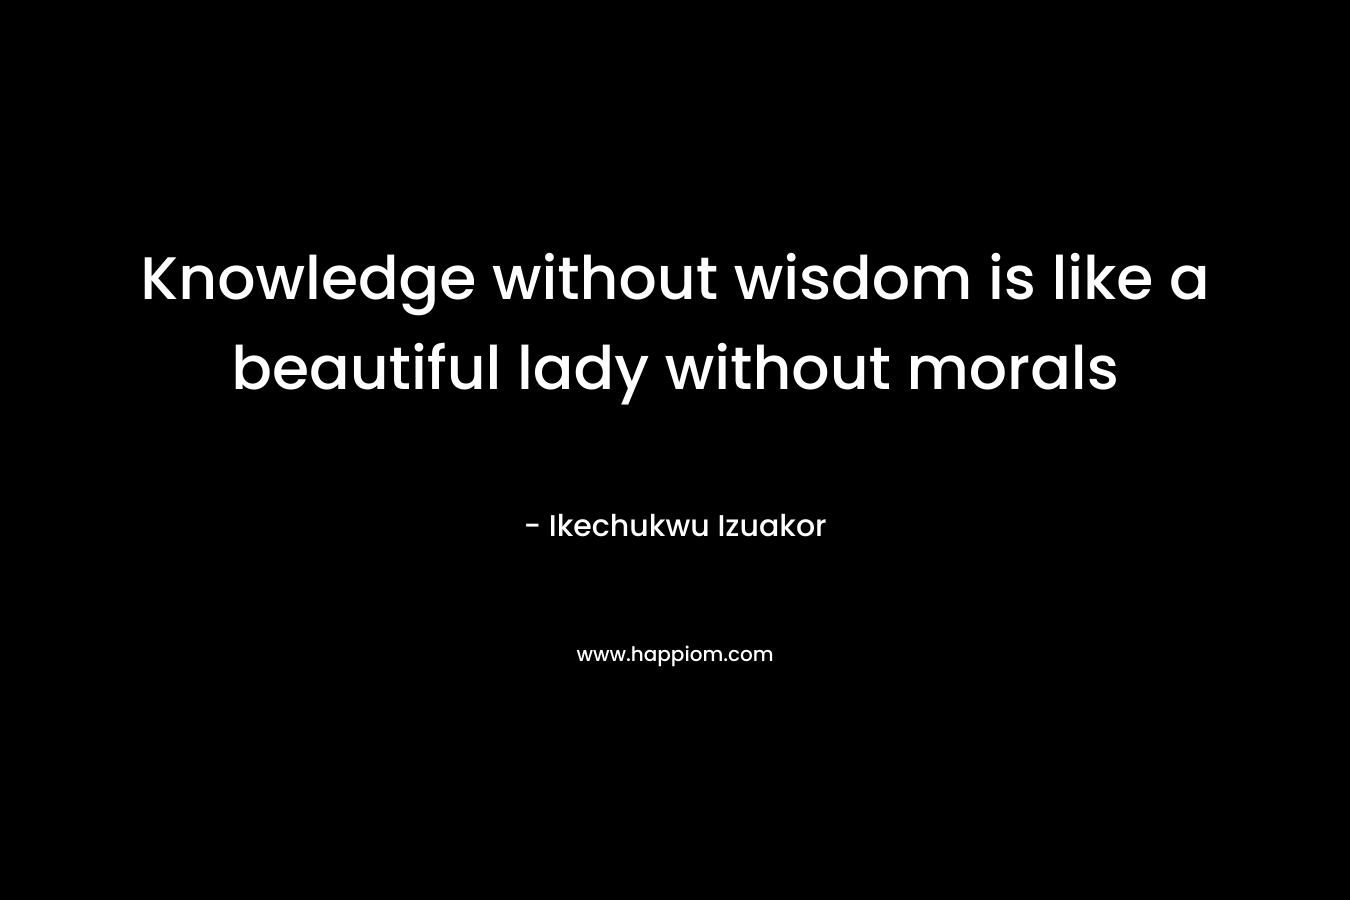 Knowledge without wisdom is like a beautiful lady without morals